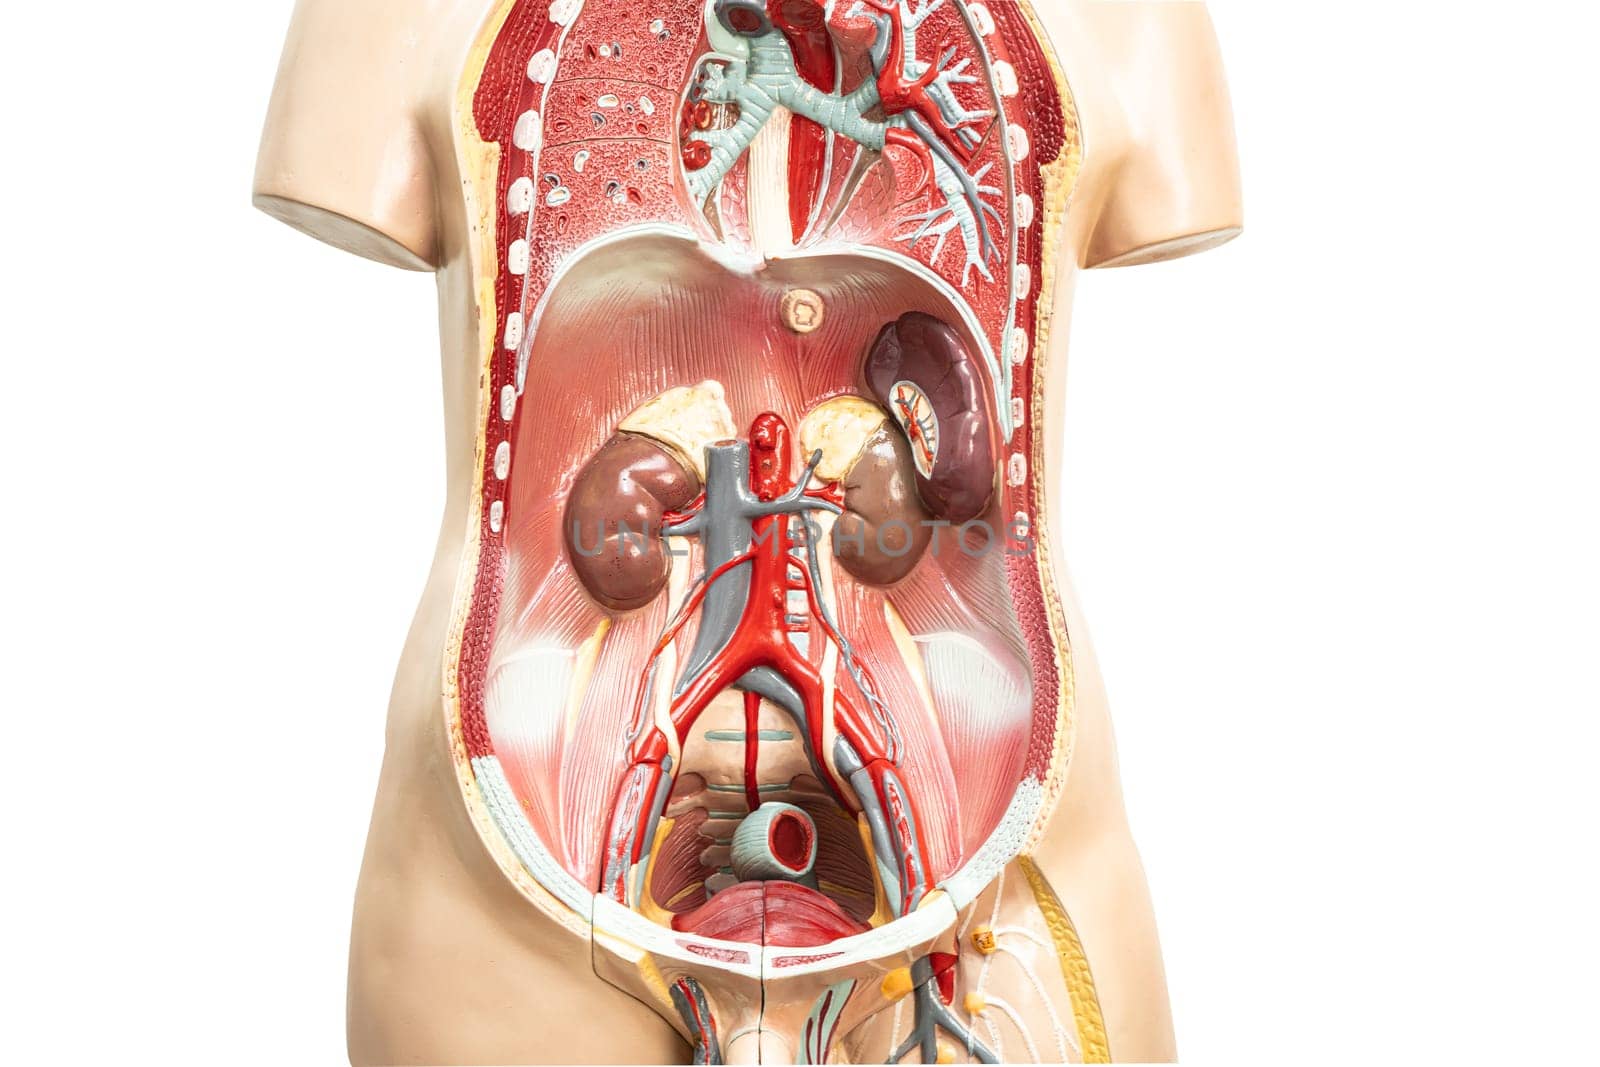 Human kidney model anatomy for medical training course, teaching medicine education. by pamai